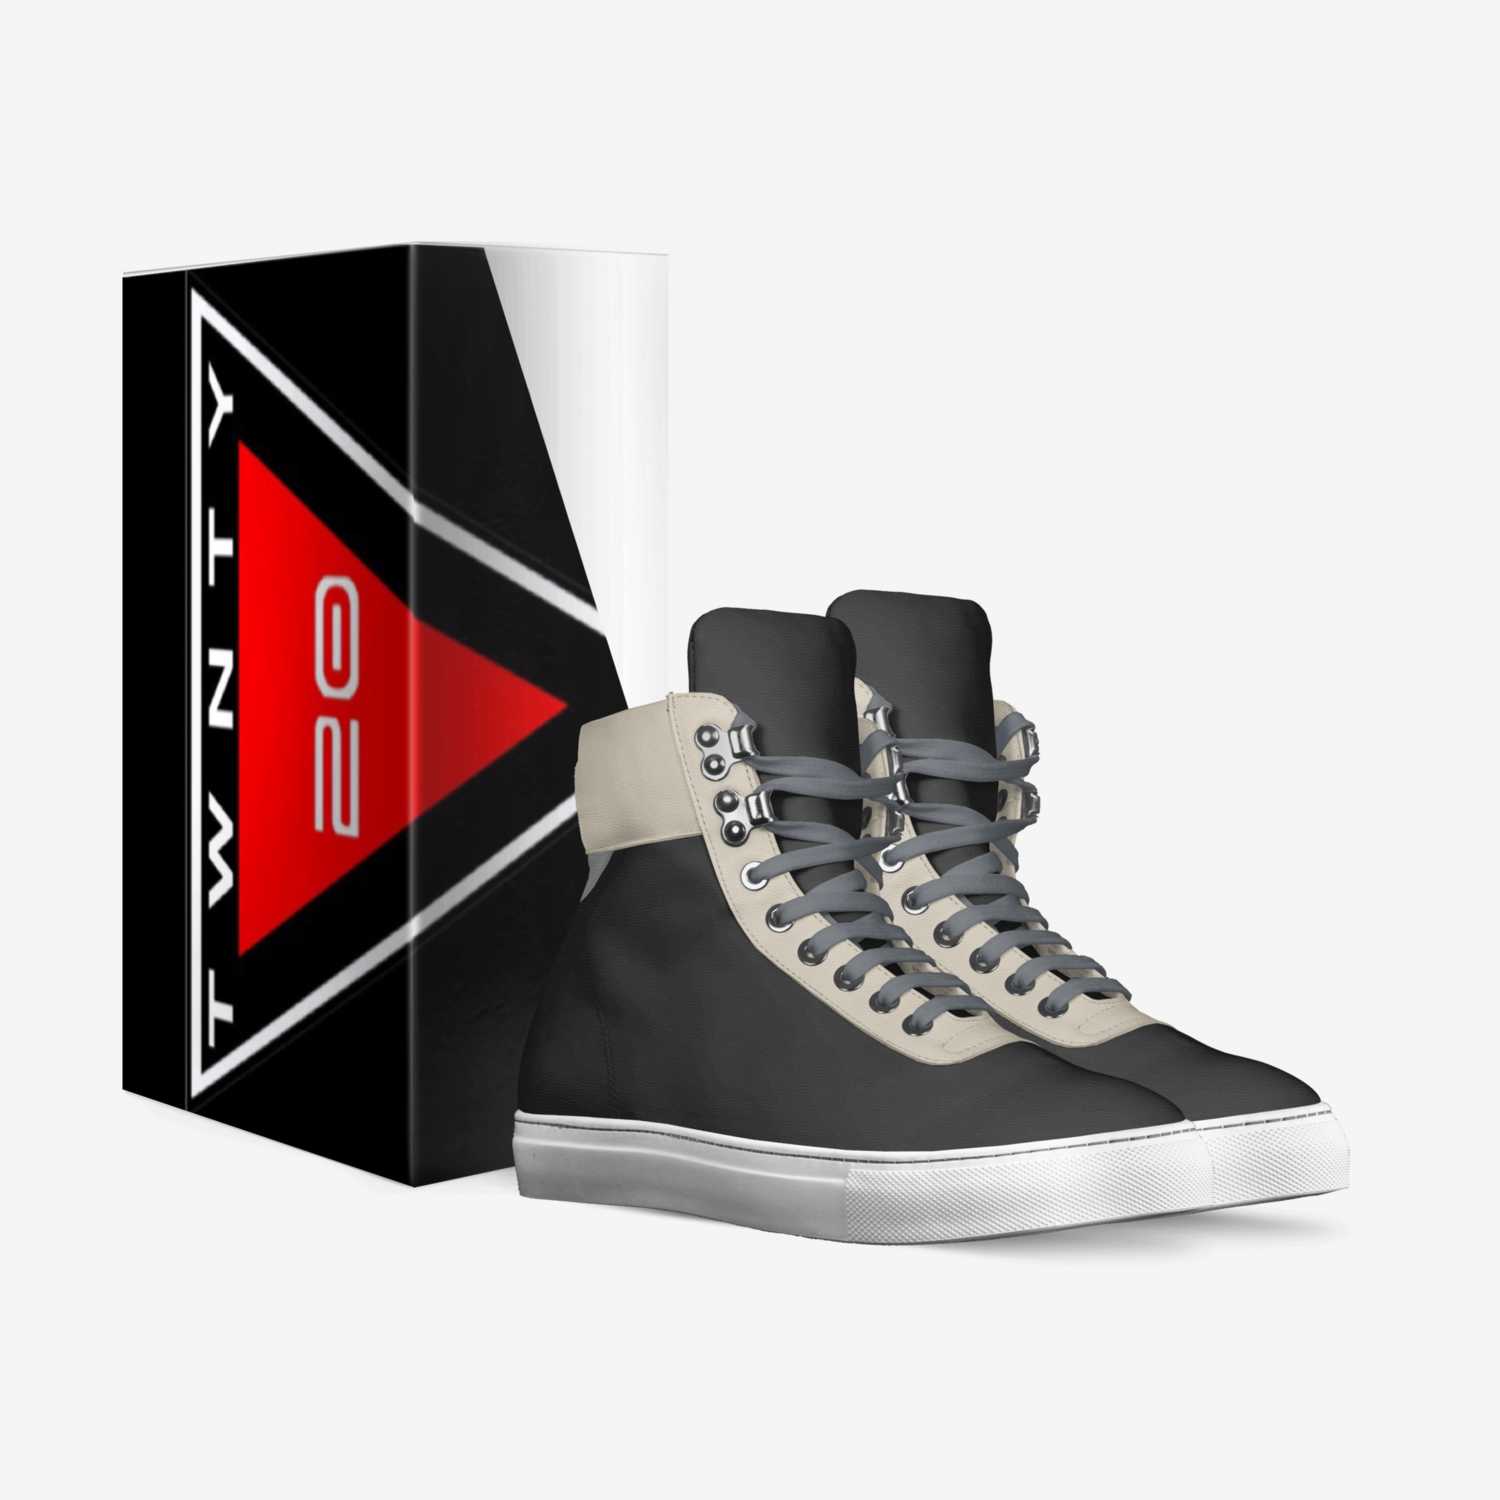 LXR 1020 custom made in Italy shoes by Kvn Elvn | Box view